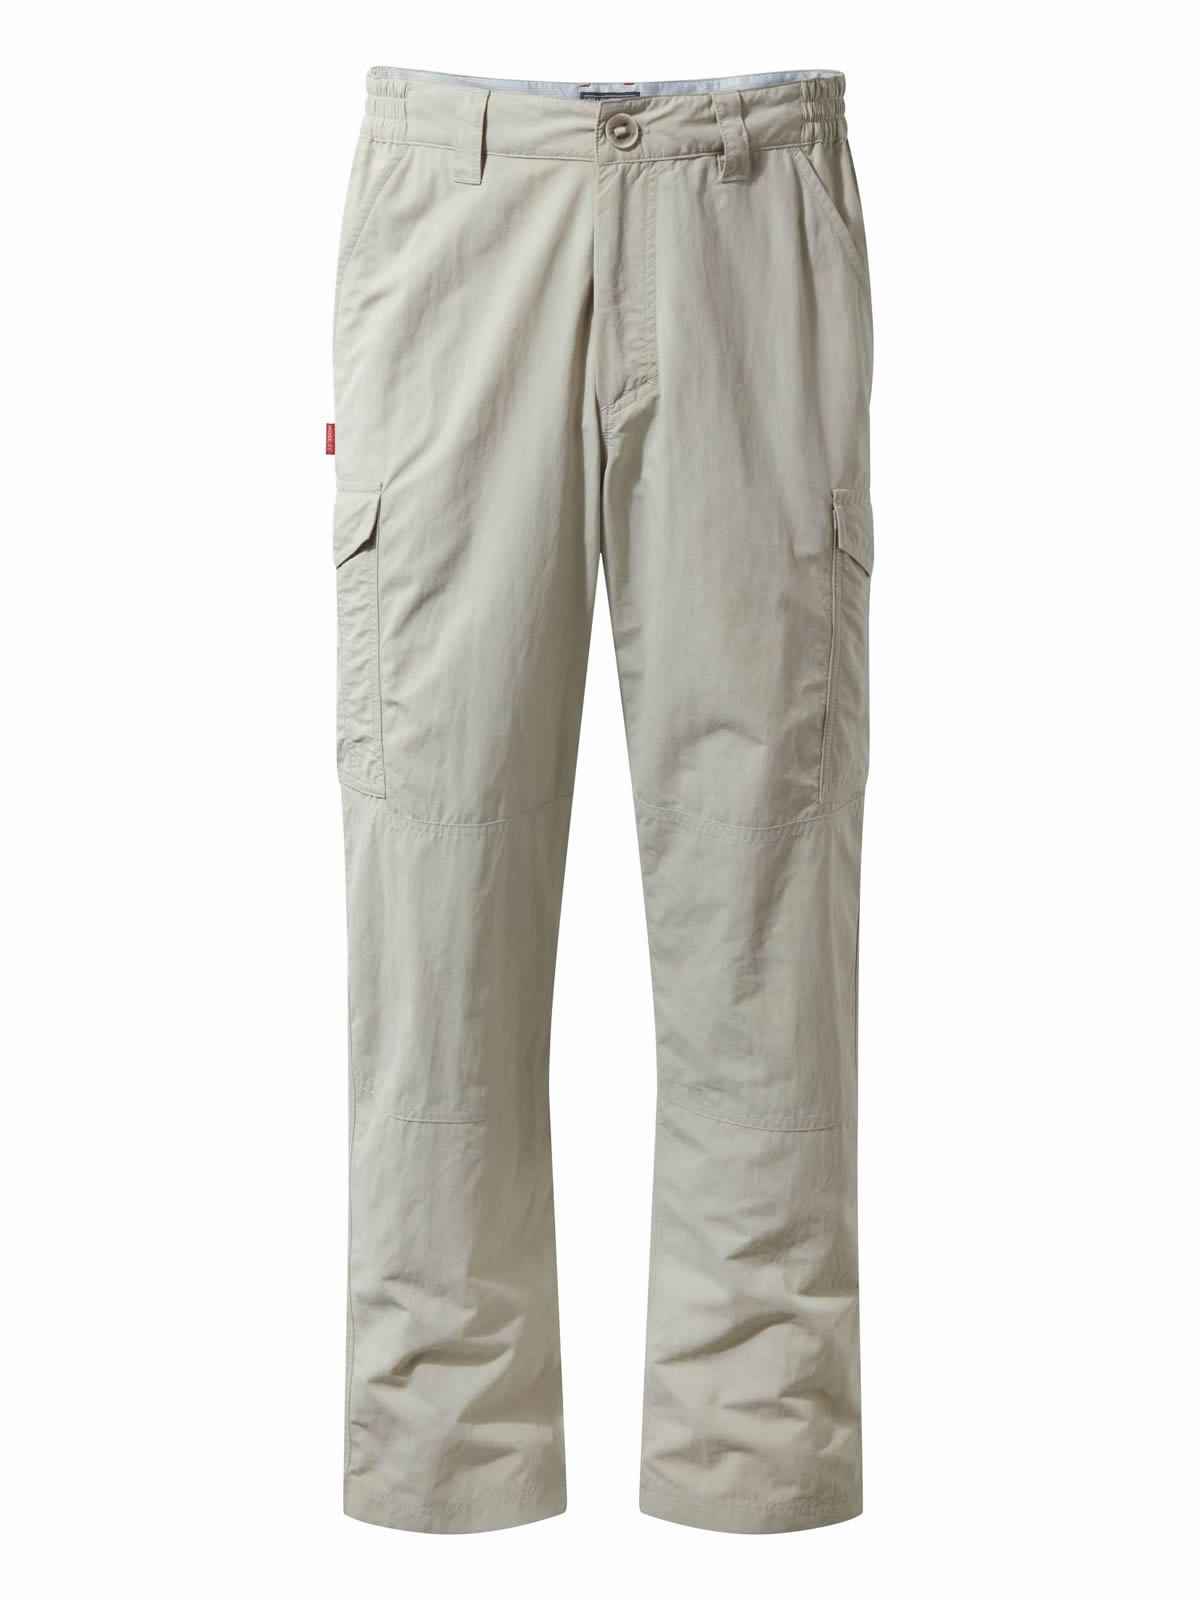 Details about   Craghoppers Mens NosiLife Cargo II Trousers CG1095 